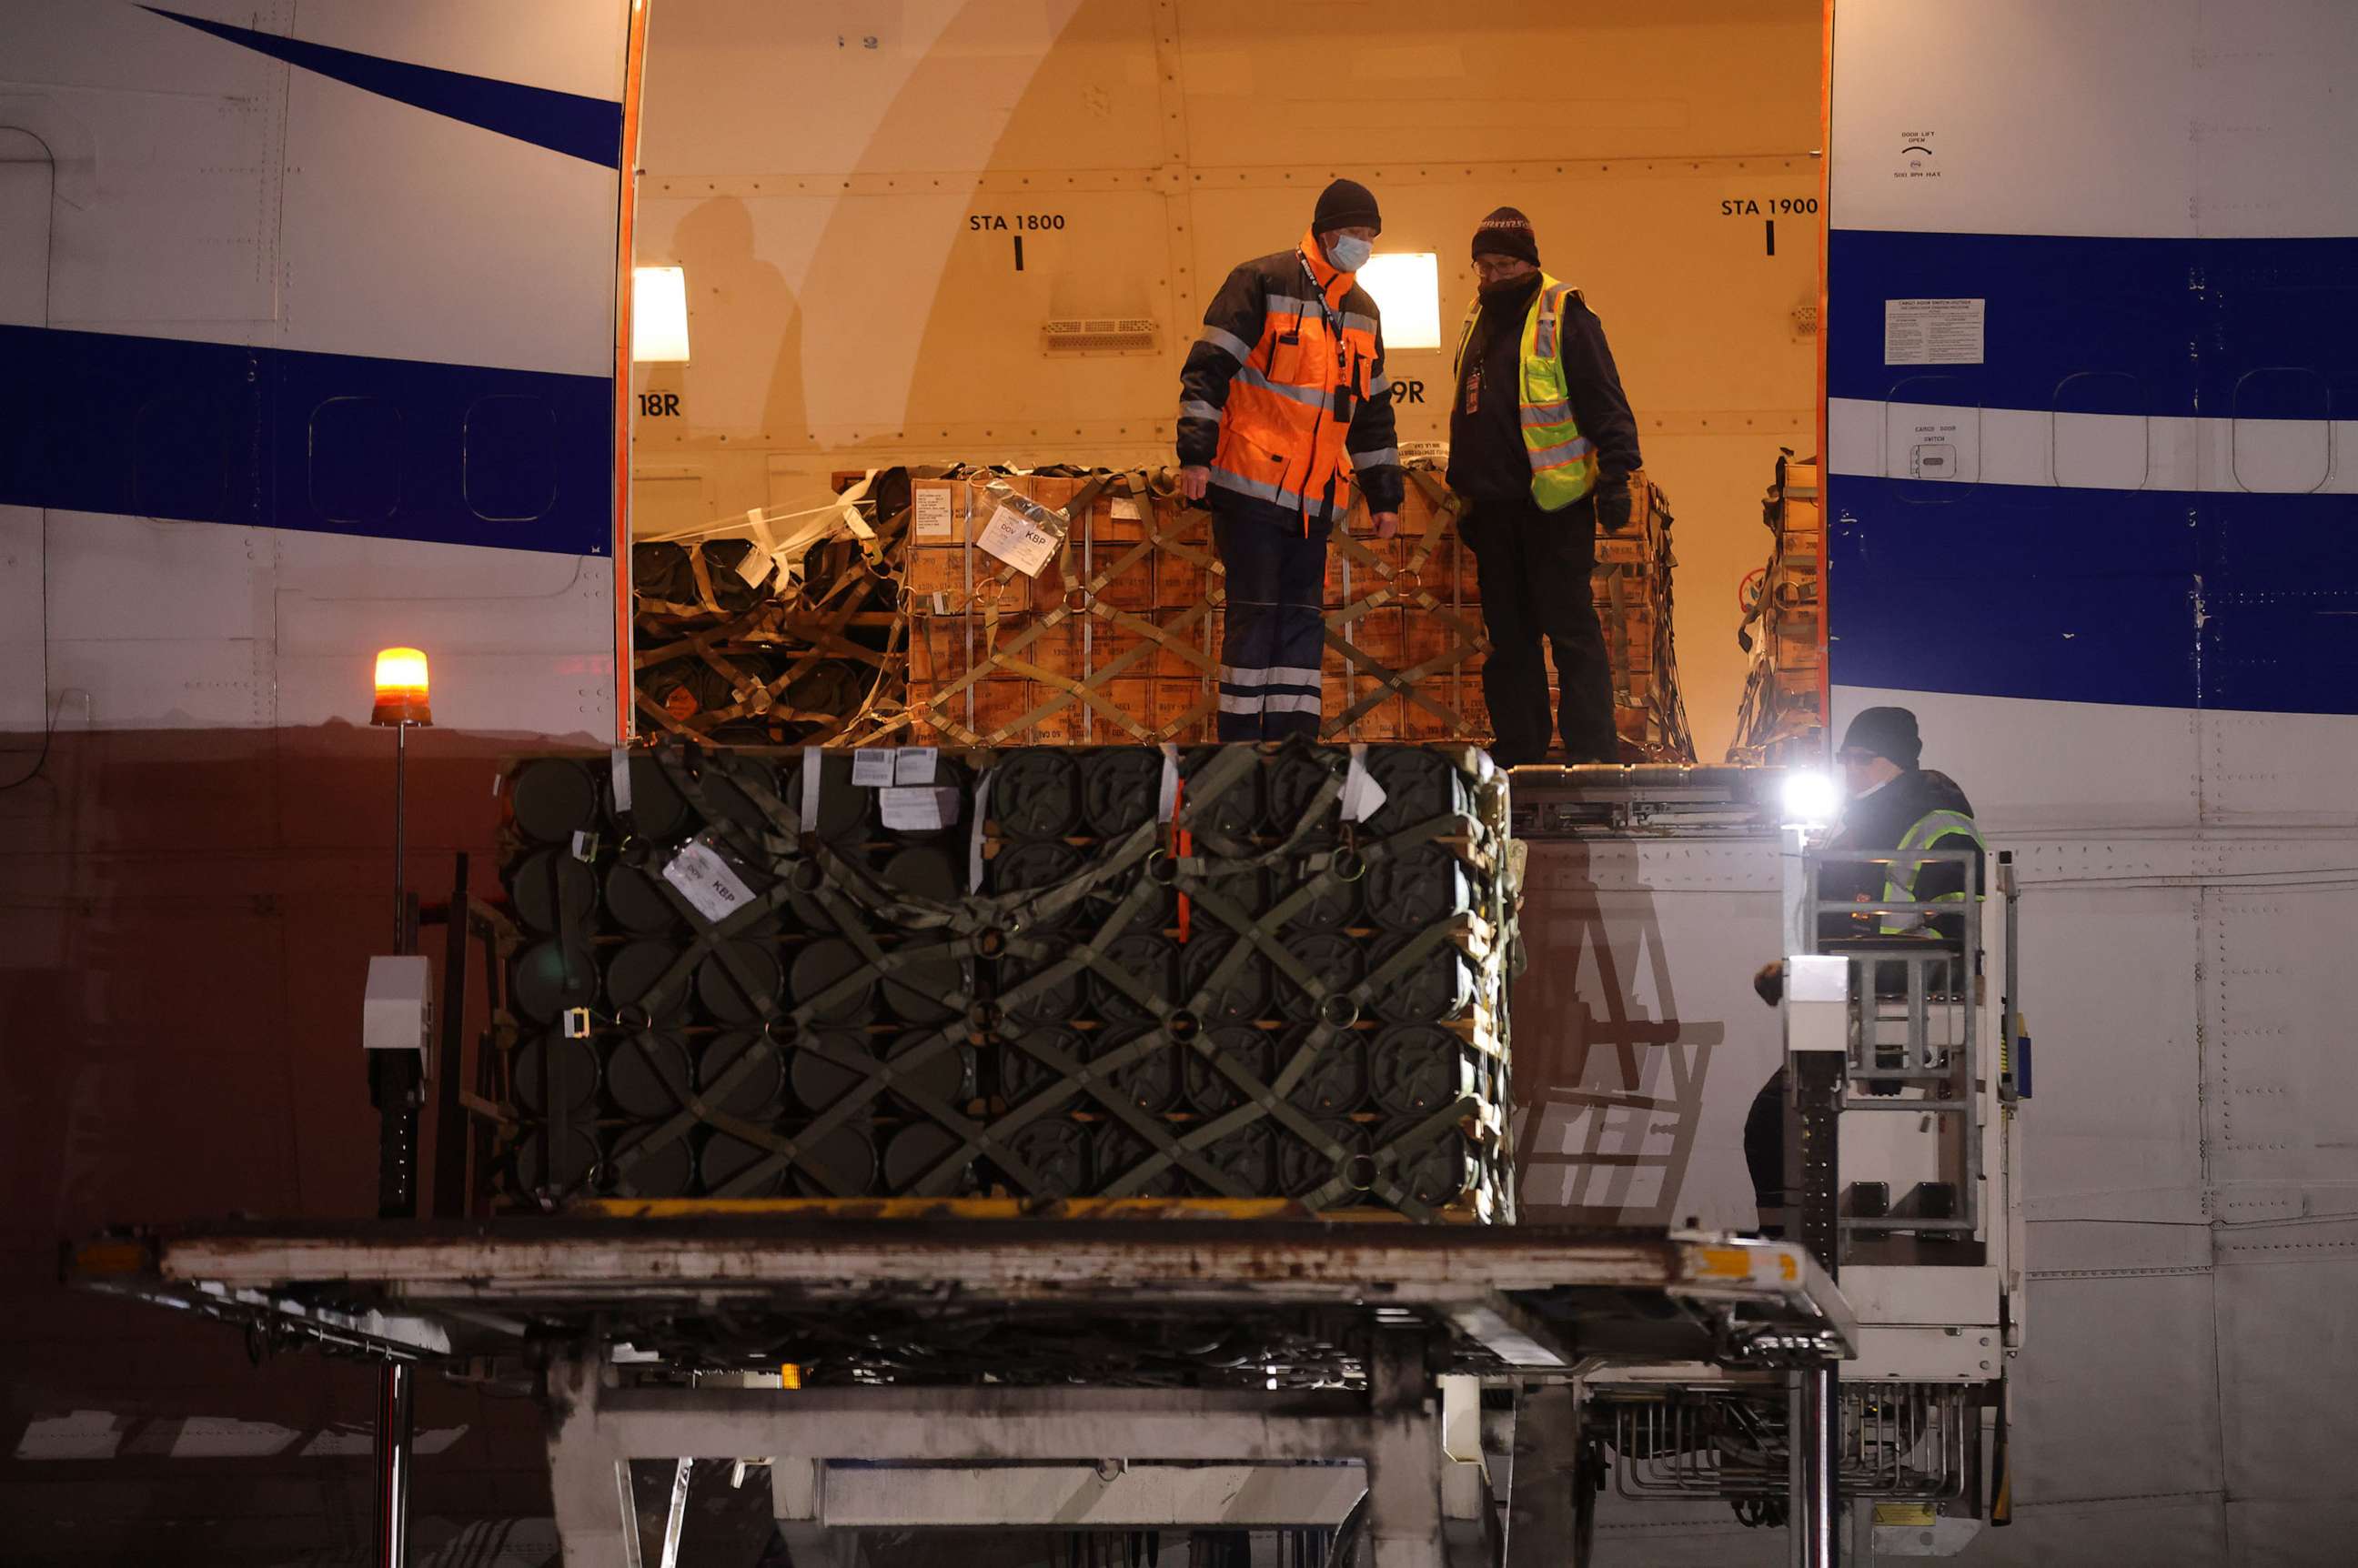 PHOTO: Ground personnel unload weapons, including Javelin anti-tank missiles, and other military hardware delivered on a National Airlines plane by the United States military at Boryspil Airport near Kyiv, Jan. 25, 2022, in Boryspil, Ukraine.